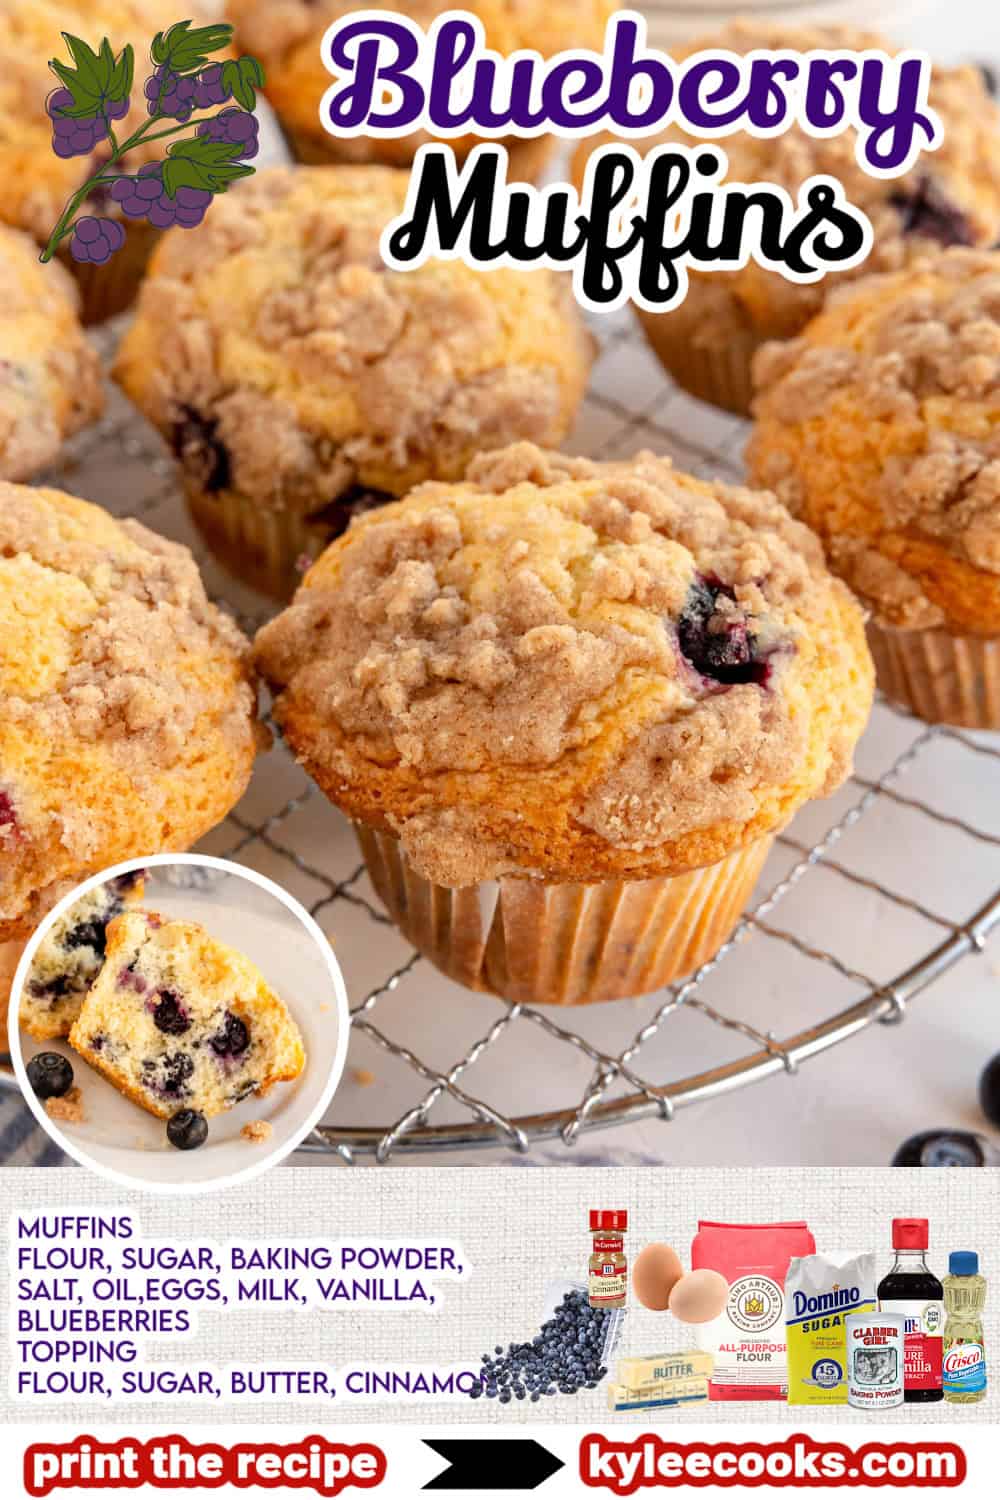 a blueberry muffin with recipe name and ingredients overlaid in text.